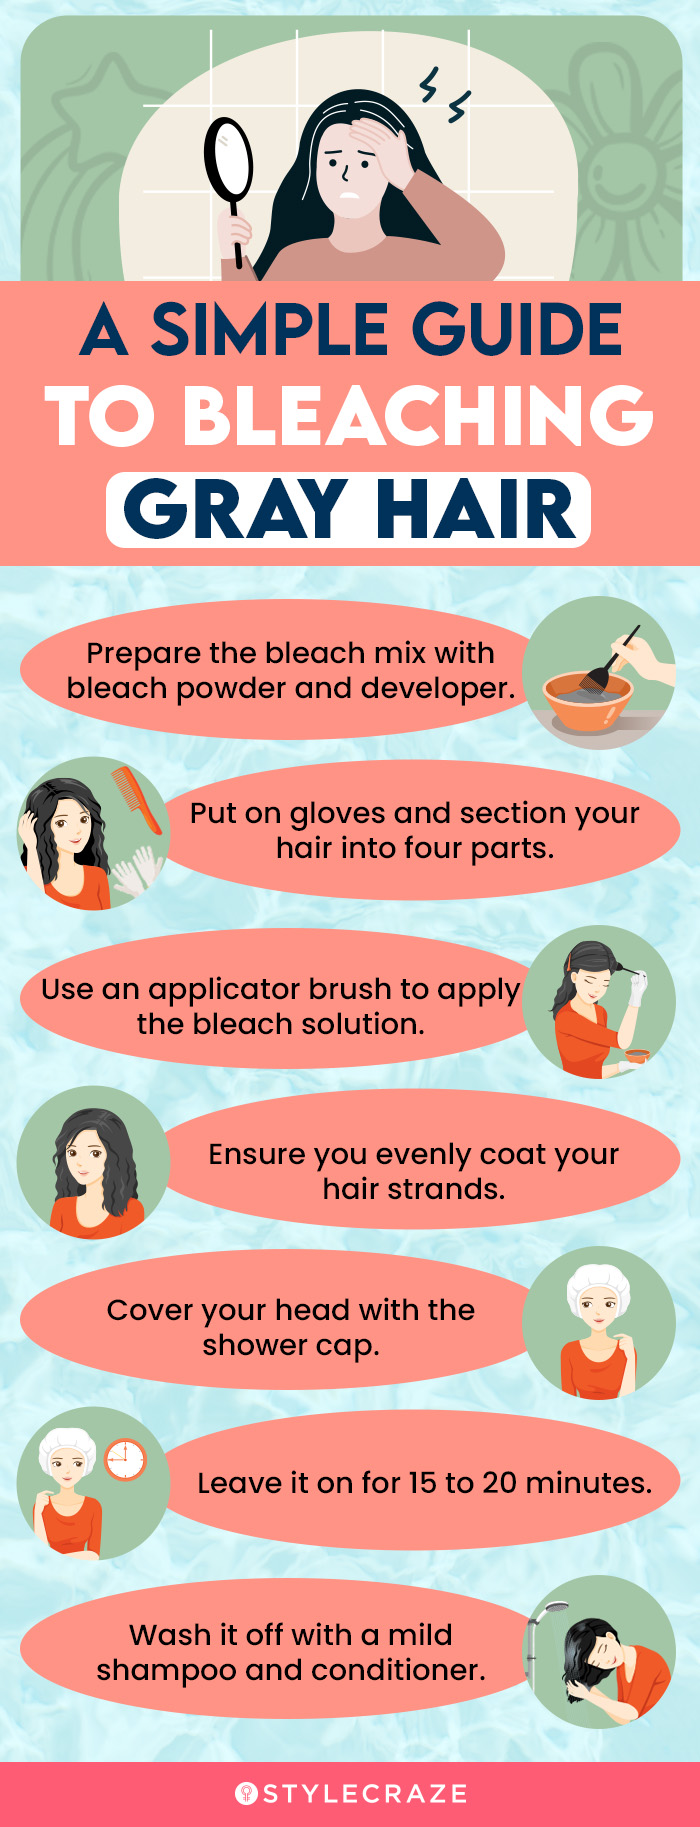 a simple guide to bleaching gray hair [infographic]